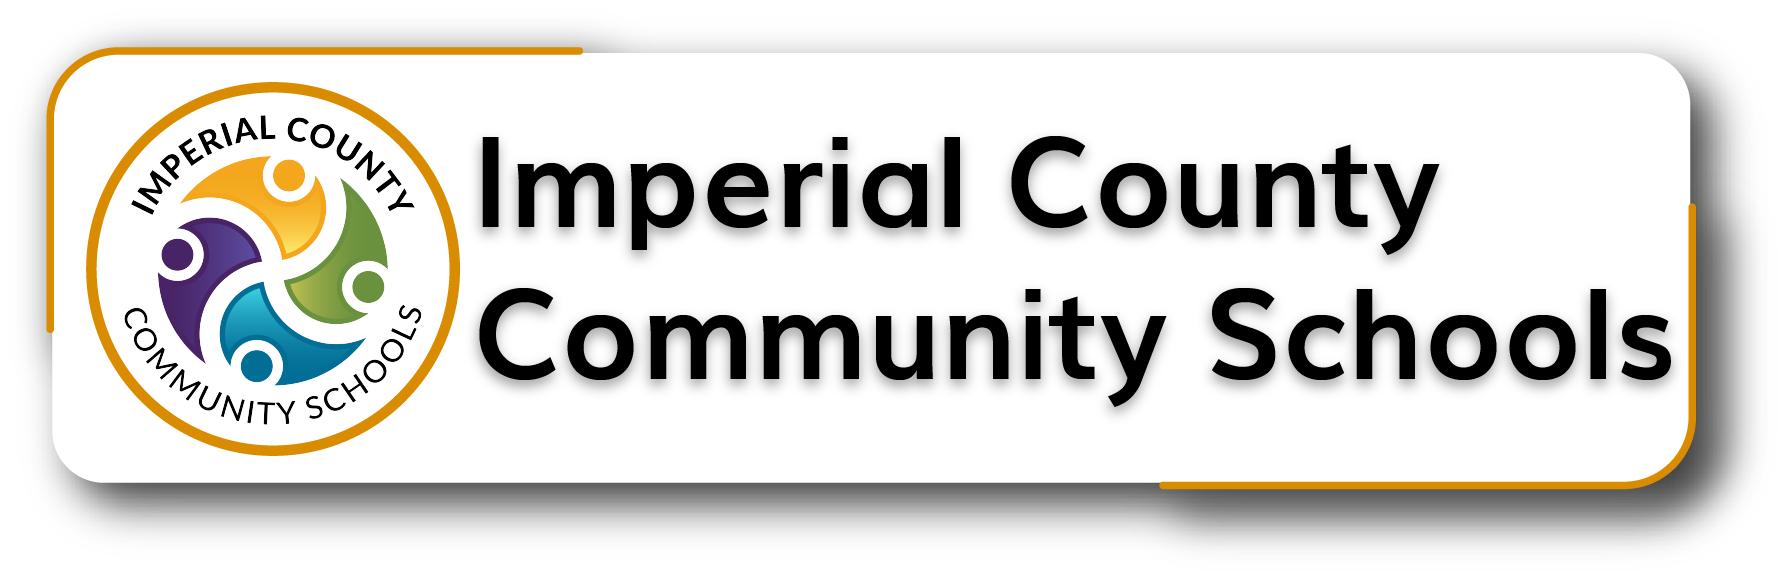 Community Schools Imperial County